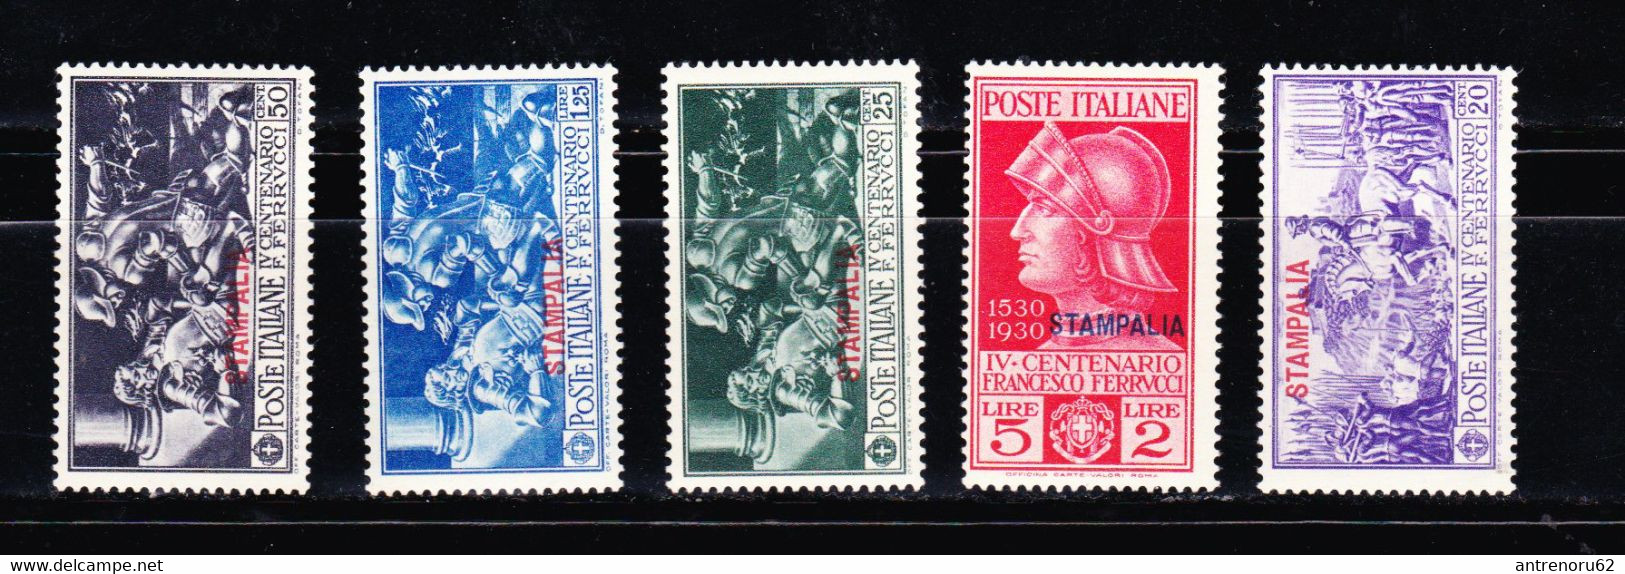 STAMPS-ITALY-STAMPALIA-1930-UNUSED-MNH**-SEE-SCAN - Egeo (Stampalia)